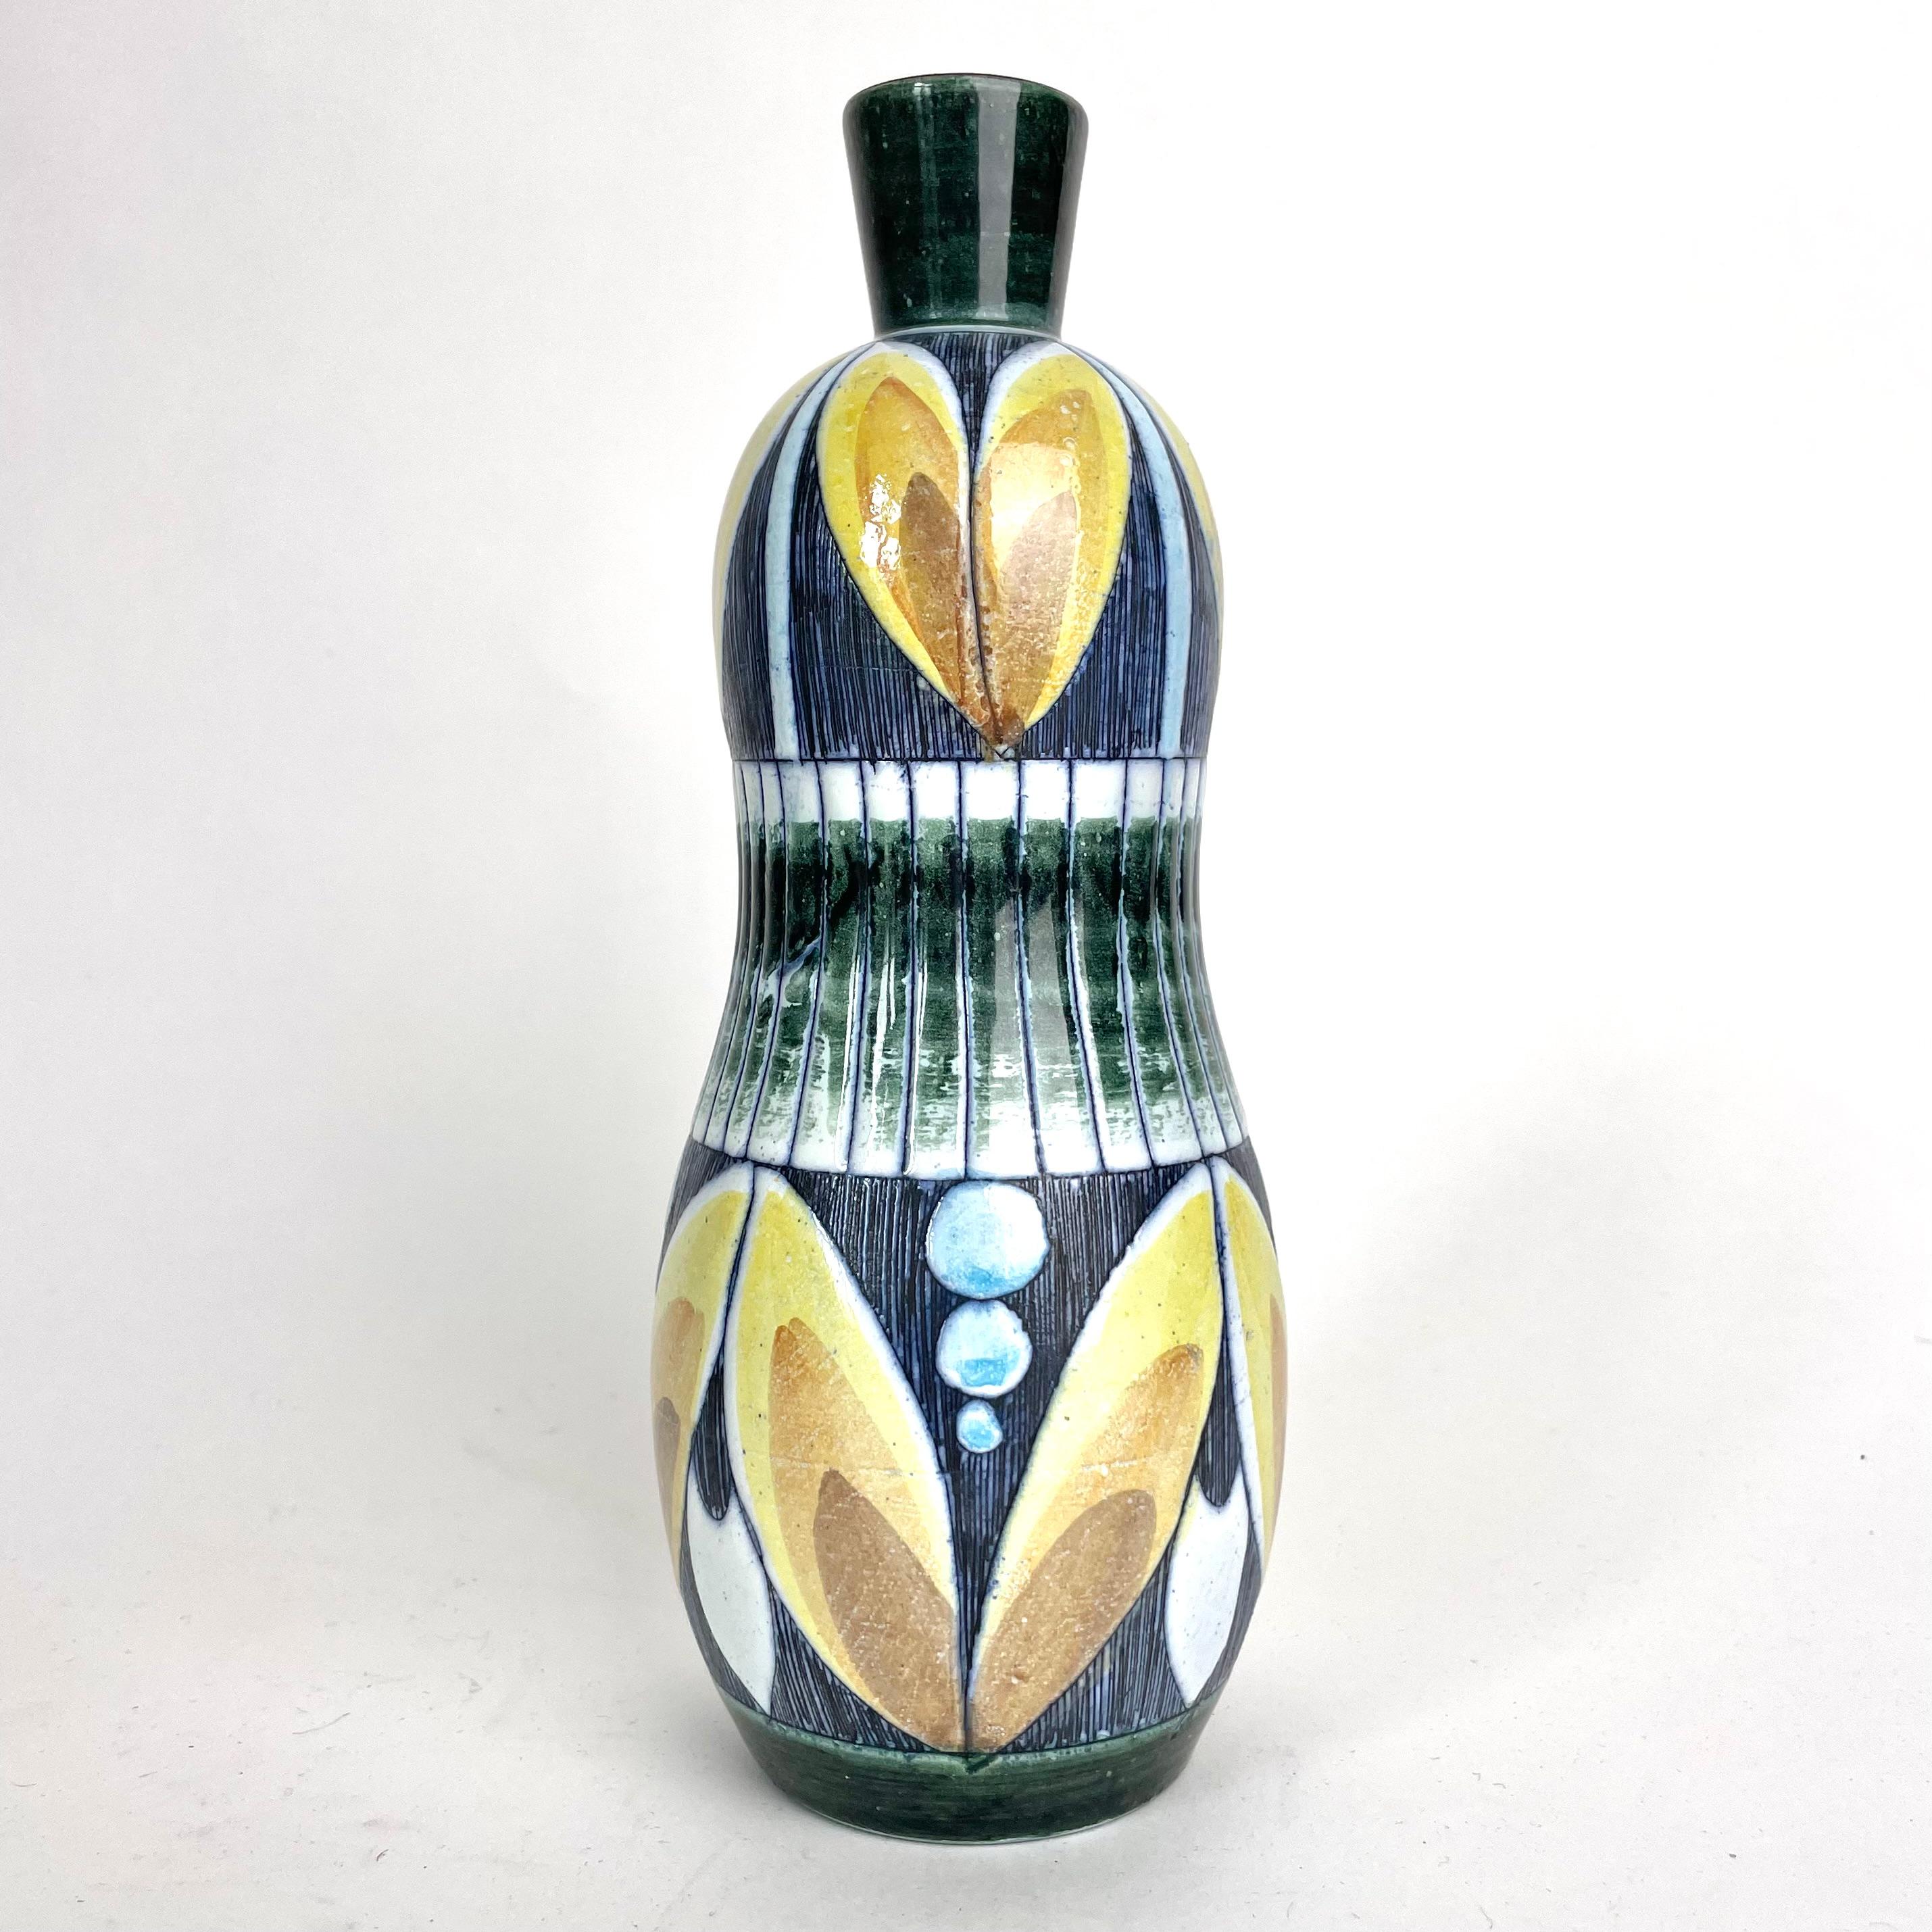 Very Decorative Vase in cerramics from Tilgmans Keramik, Gothenburg, Sweden with a very period design from the 1950s. Made with Sgraffito technique.

Wear consistent with age and use 